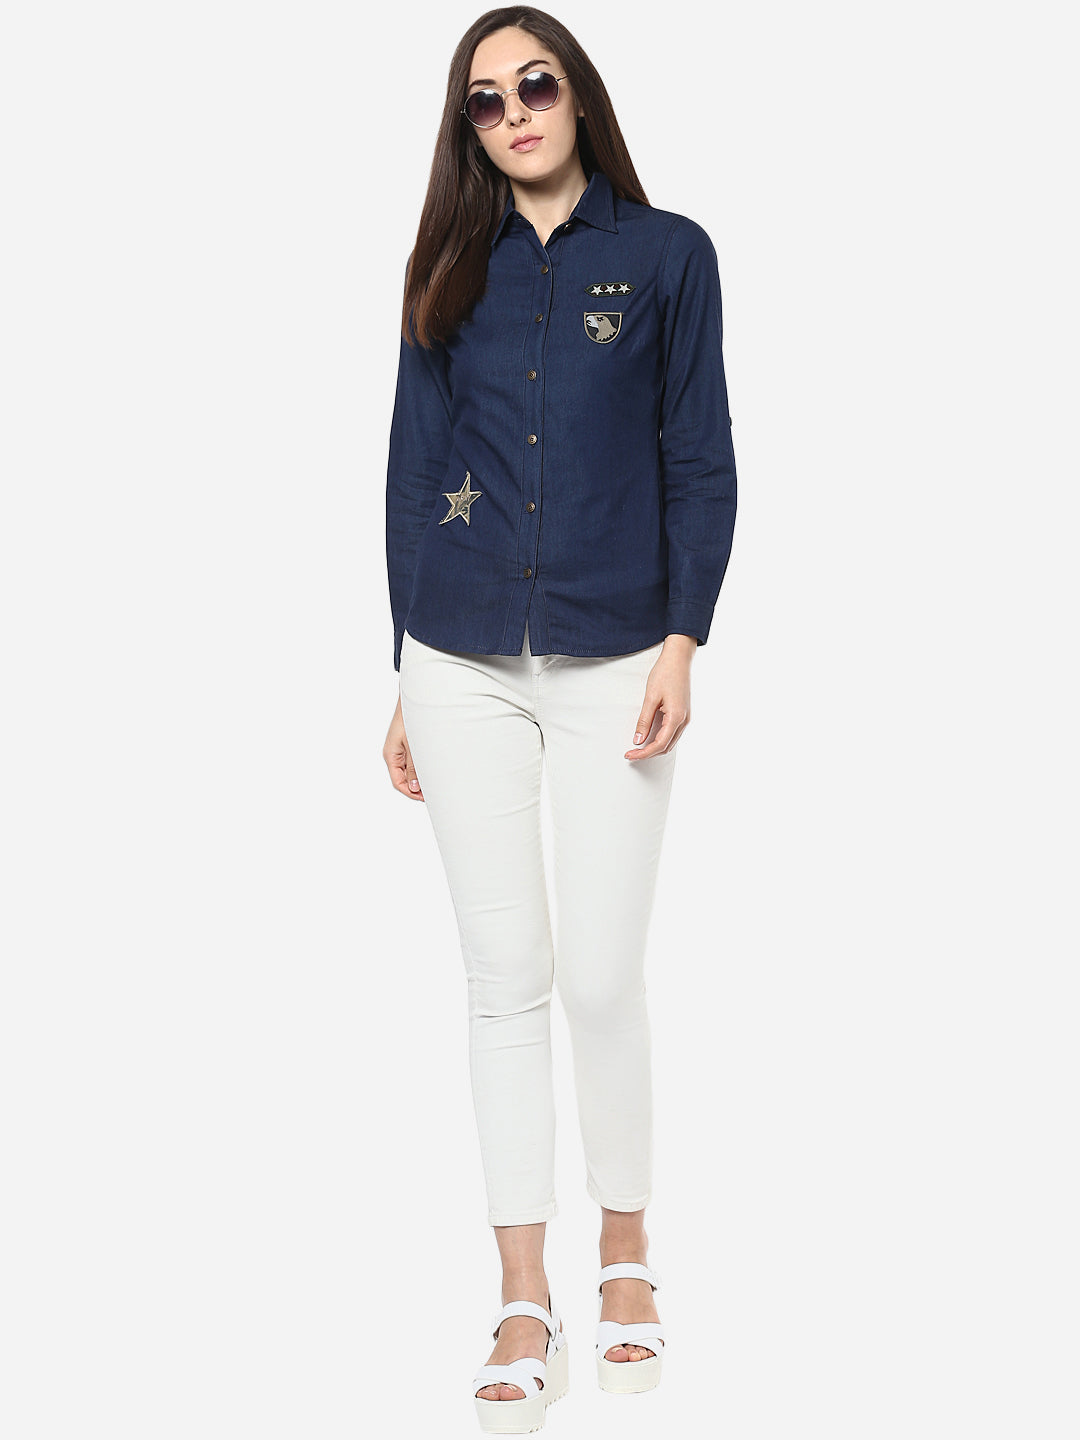 Women's Denim Shirt with Patches